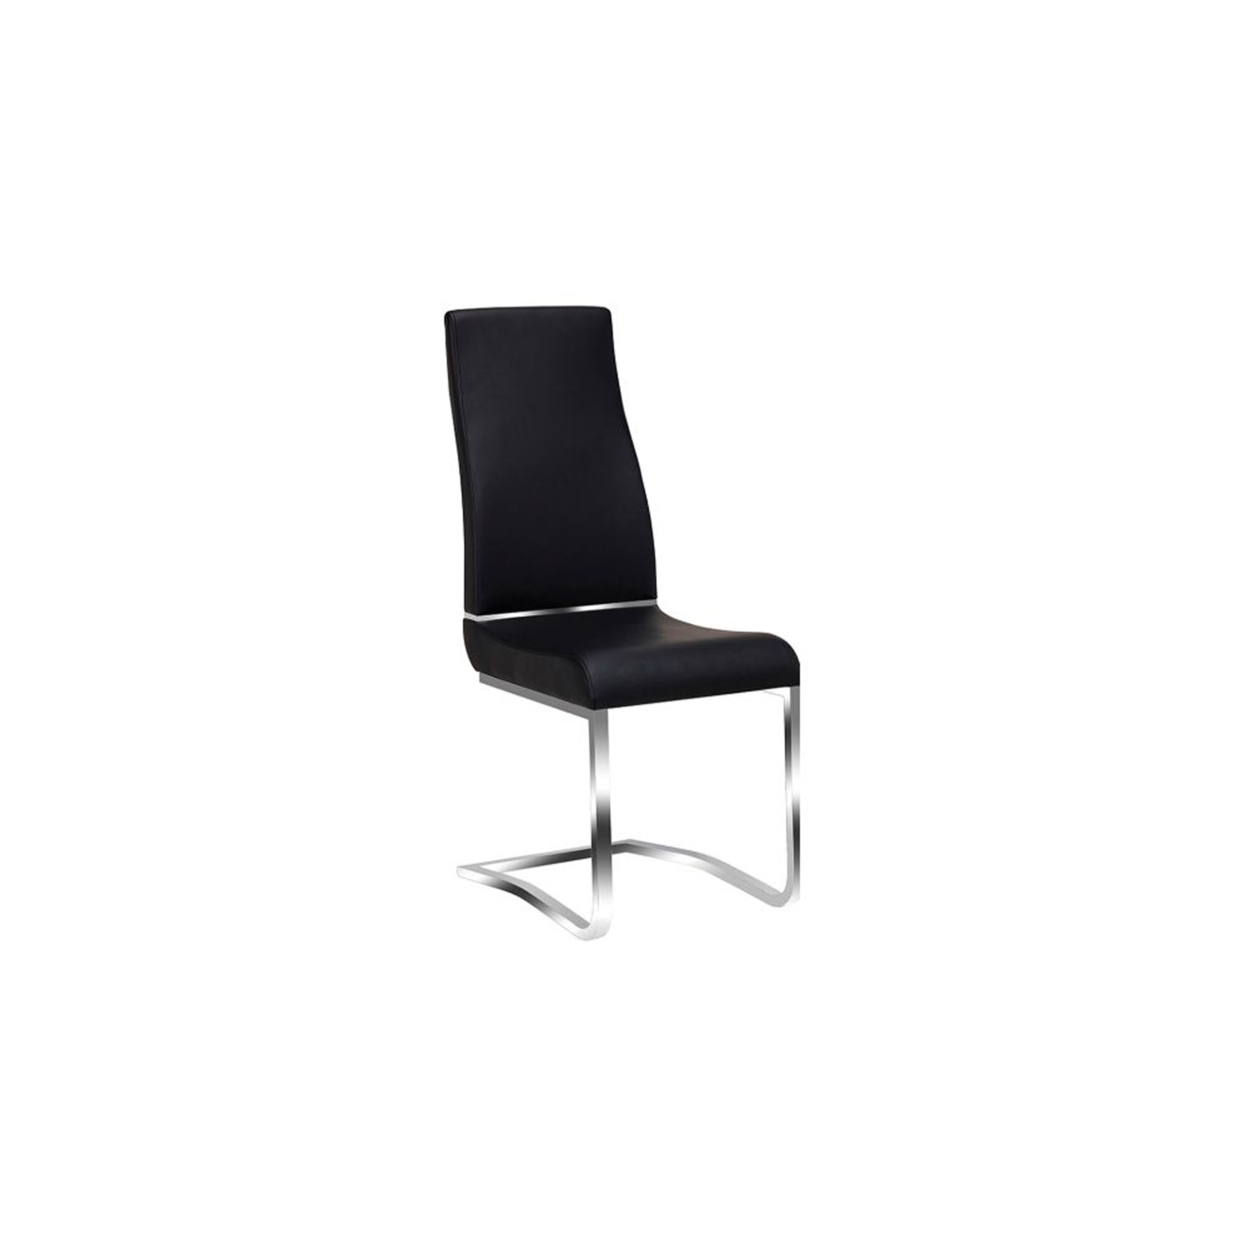 Leatherette Steel Chair With Ergonomically Designed Back, Set Of Two, Black And Silver- Saltoro Sherpi